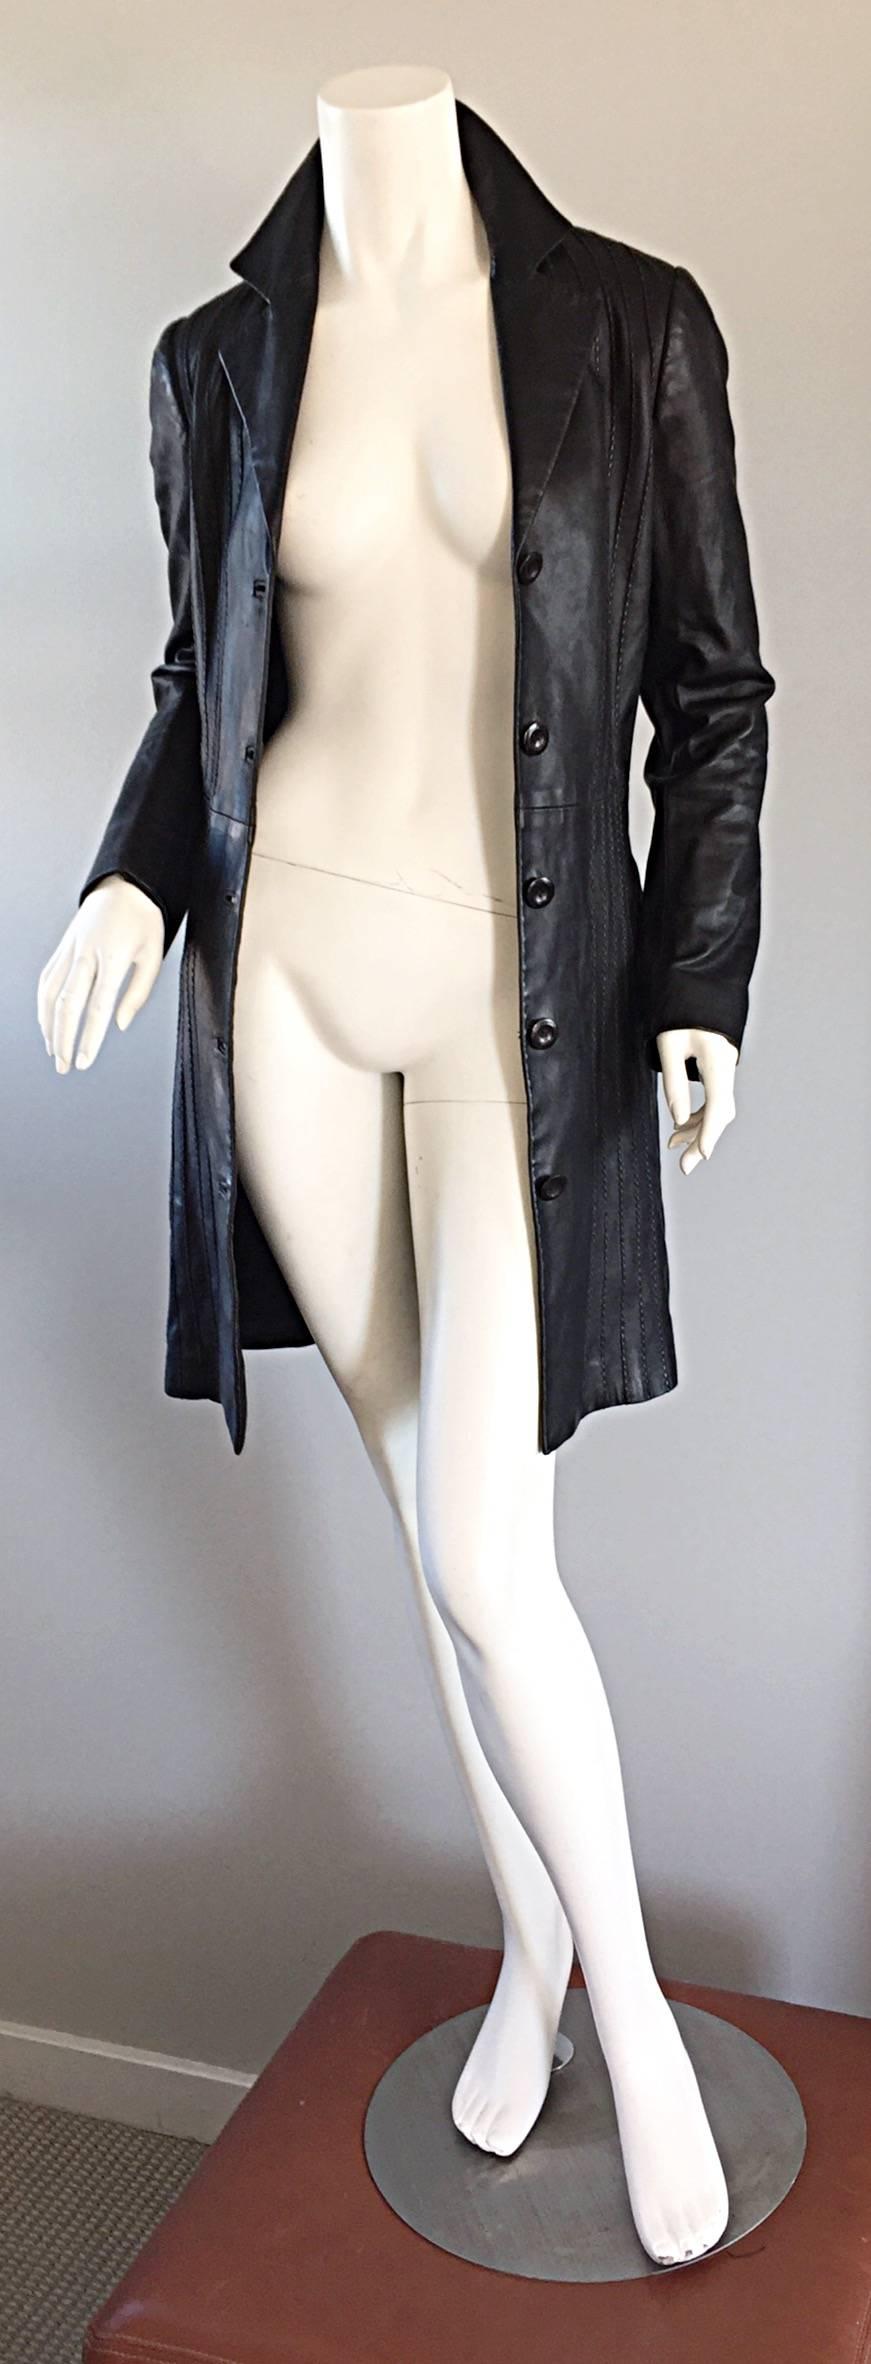 Chic Katayone Adeli early 2000s black leather belted trench jacket! Intricate vertical stitching throughout. Slim fit, that is the perfect everyday jacket! Can even be worn as a dress! Attached belt, with pockets at both sides of the waist.